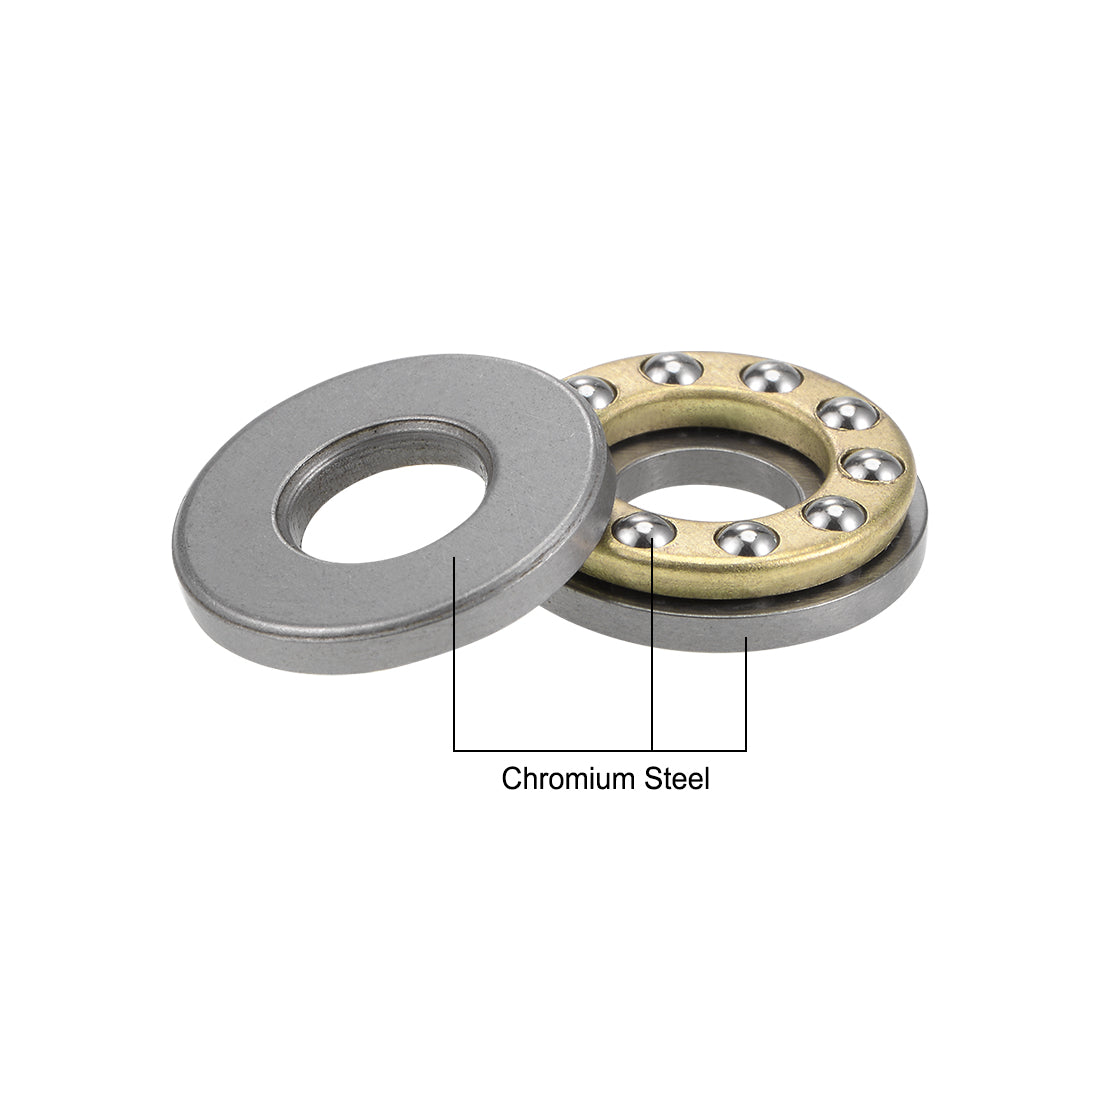 uxcell Uxcell F8-19M Miniature Thrust Ball Bearing 8x19x7mm Chrome Steel with Washer 10Pcs